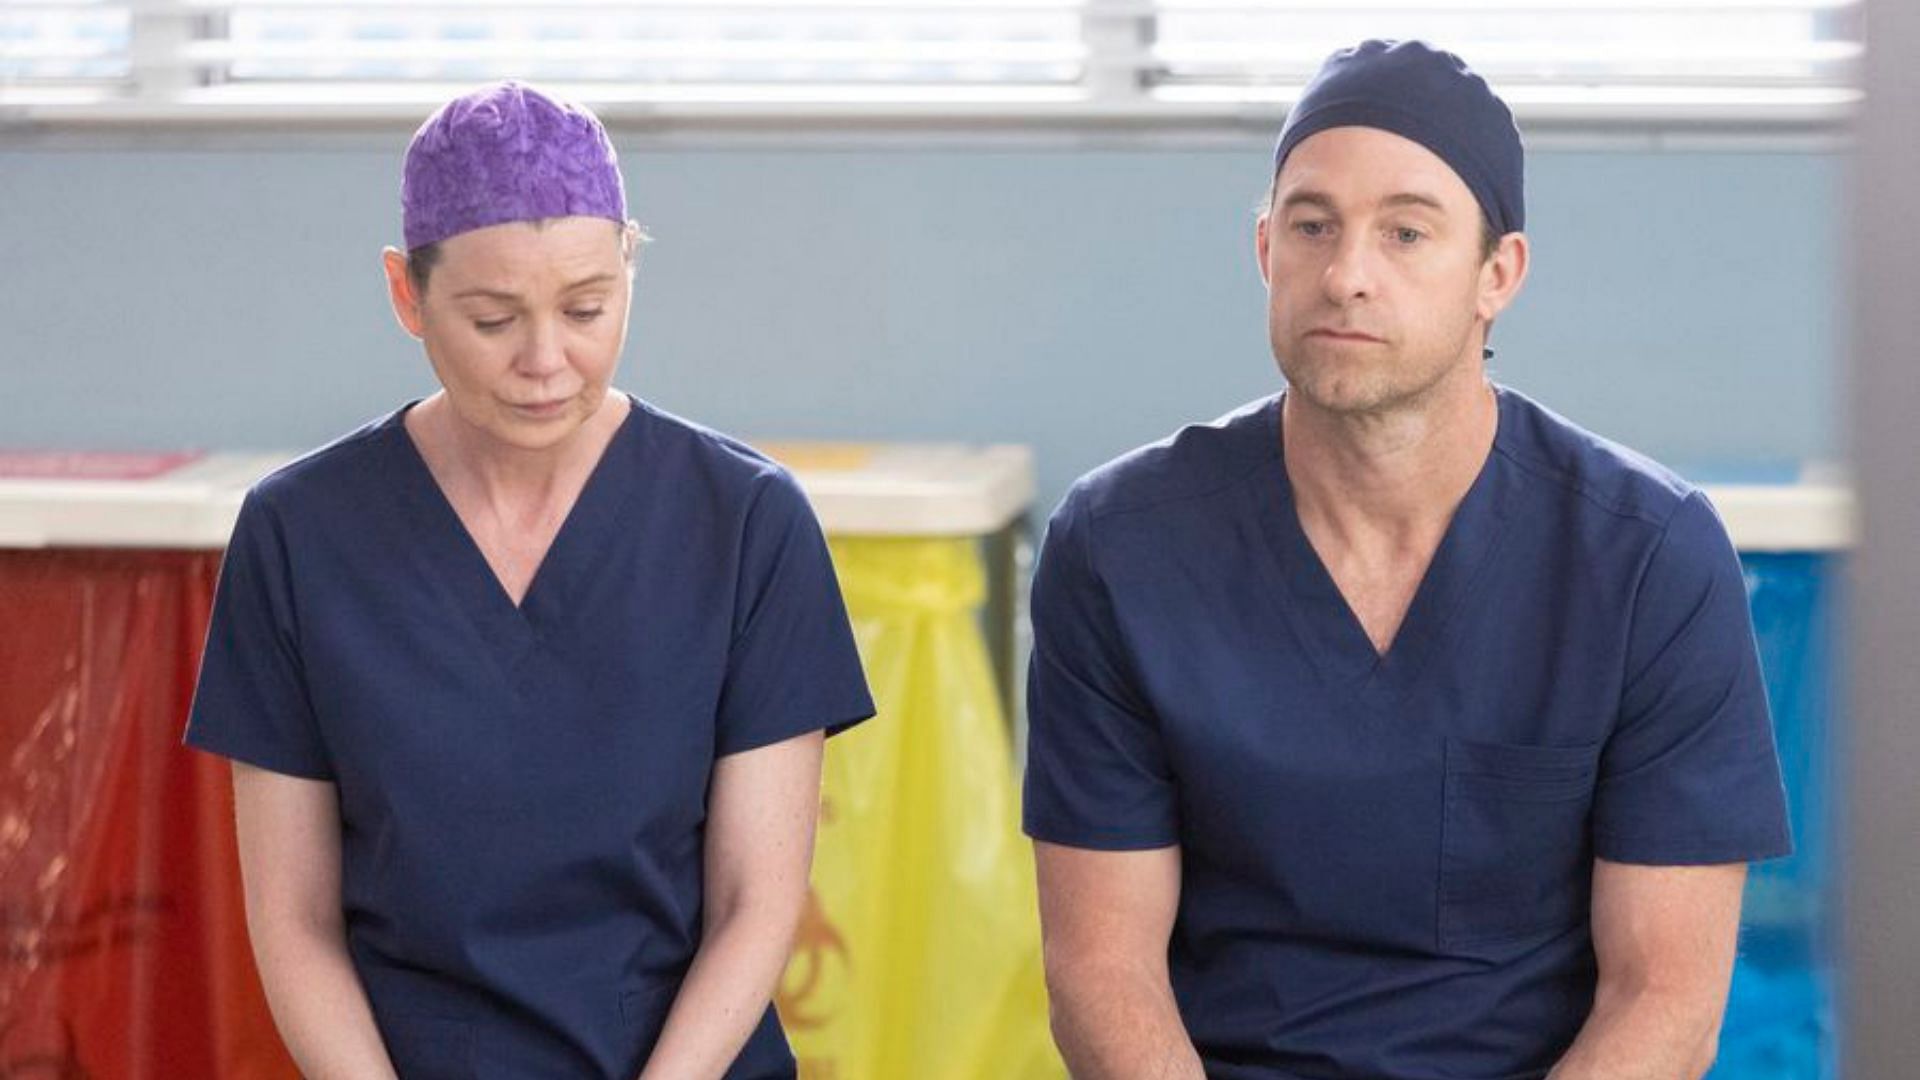 Meredith and Nick in Season 18 Episode 15 promo pictures (Image via @squadmernick/Twitter)